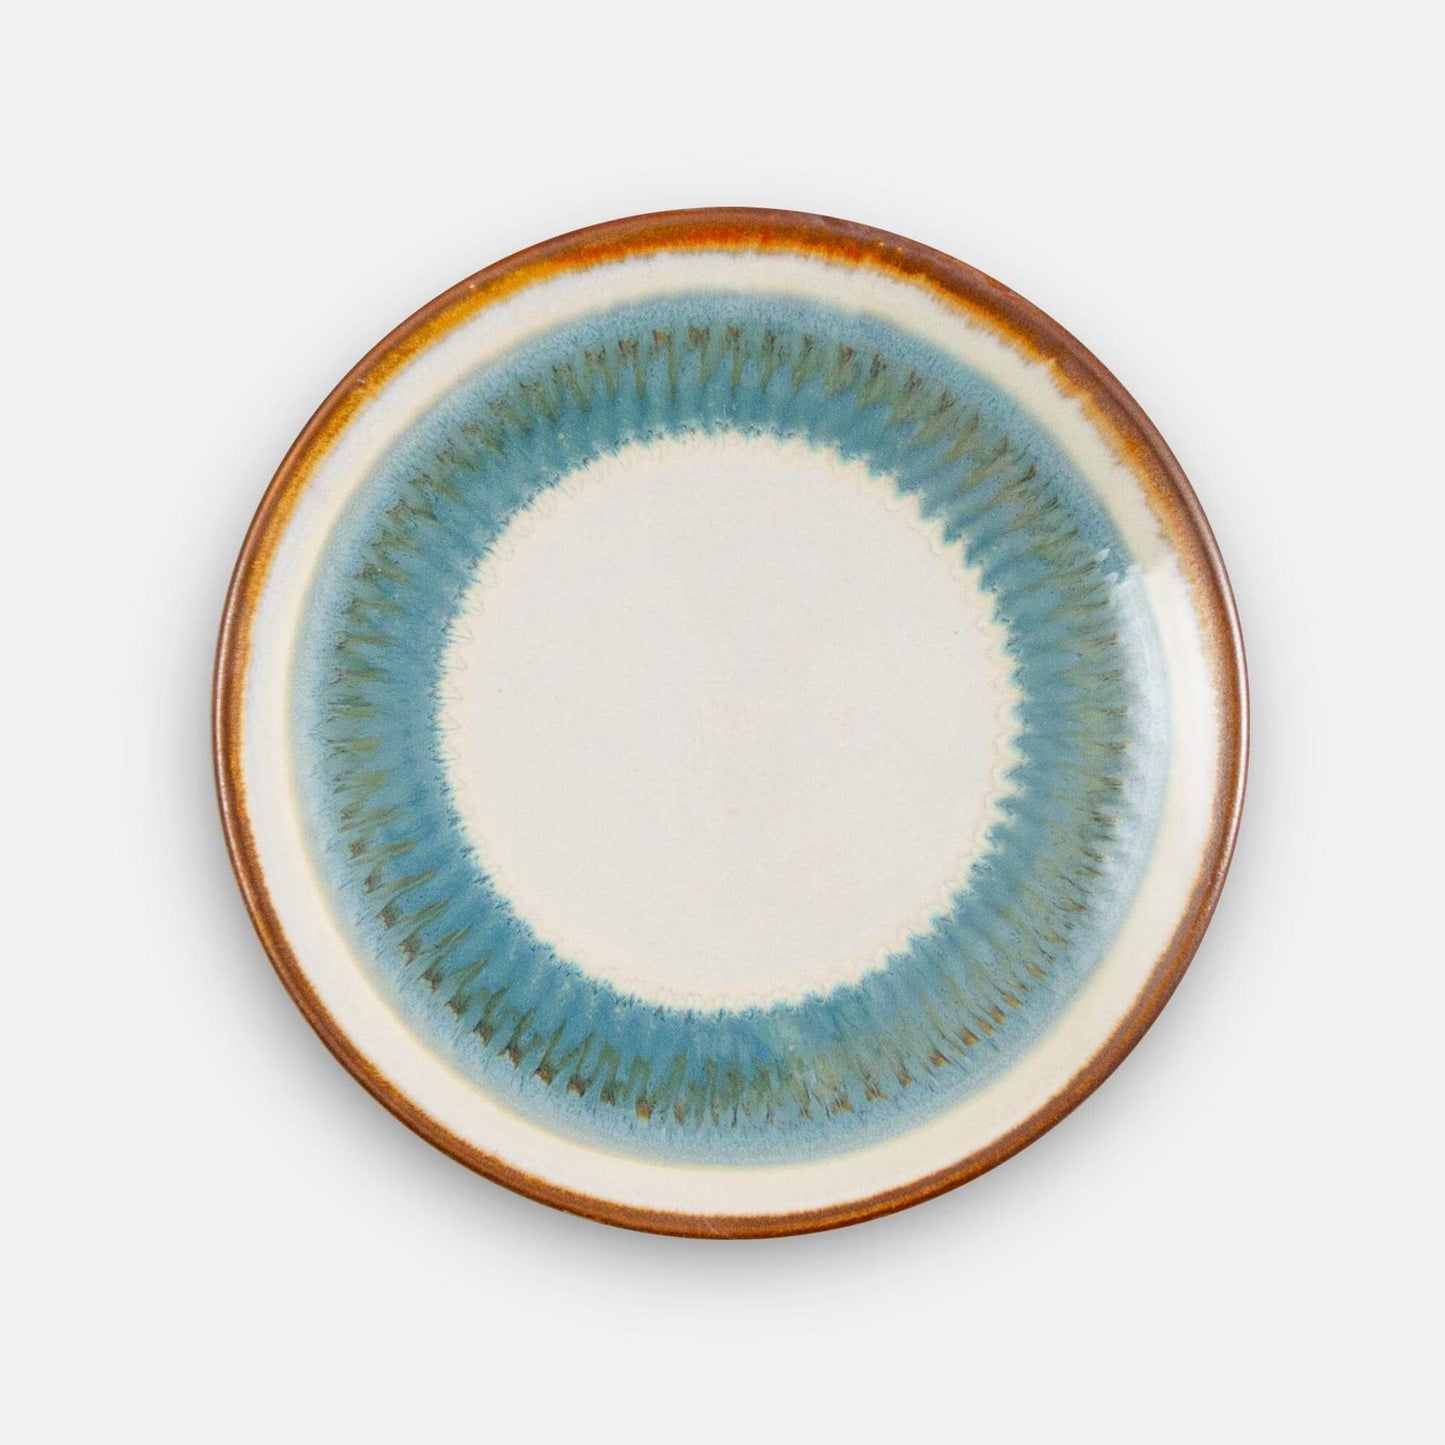 Handmade Pottery Footed Dinner Plate in Ivory & Blue pattern made by Georgetown Pottery in Maine